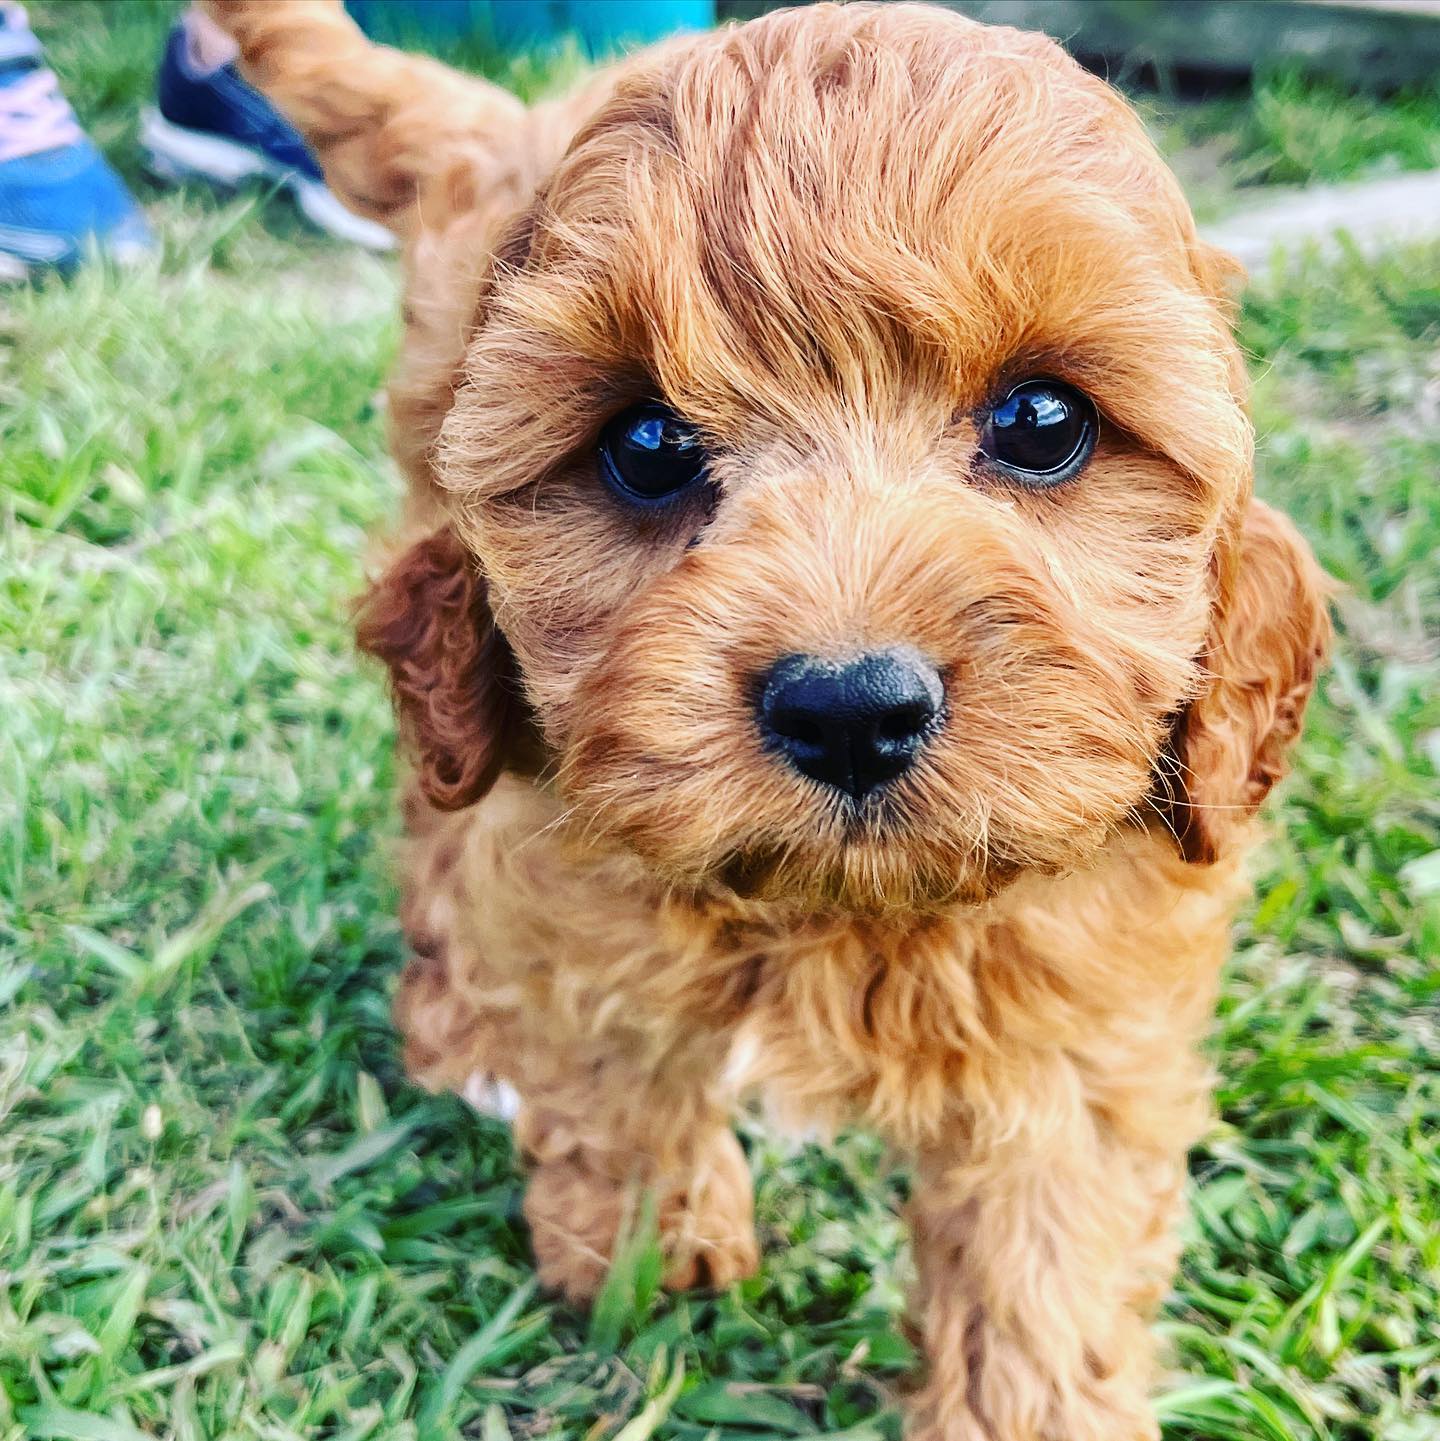 Welcome, Annie 🐶😍 And thanks to Steph at @wildremedy.animalhomeopath for guiding us through the baby days! ❤️🐶❤️
.
.
.
#pooch #cavoodle #fromthefarm #dogsofinsta #puppylove #dogsofinstagram #pup #anniethepuppy